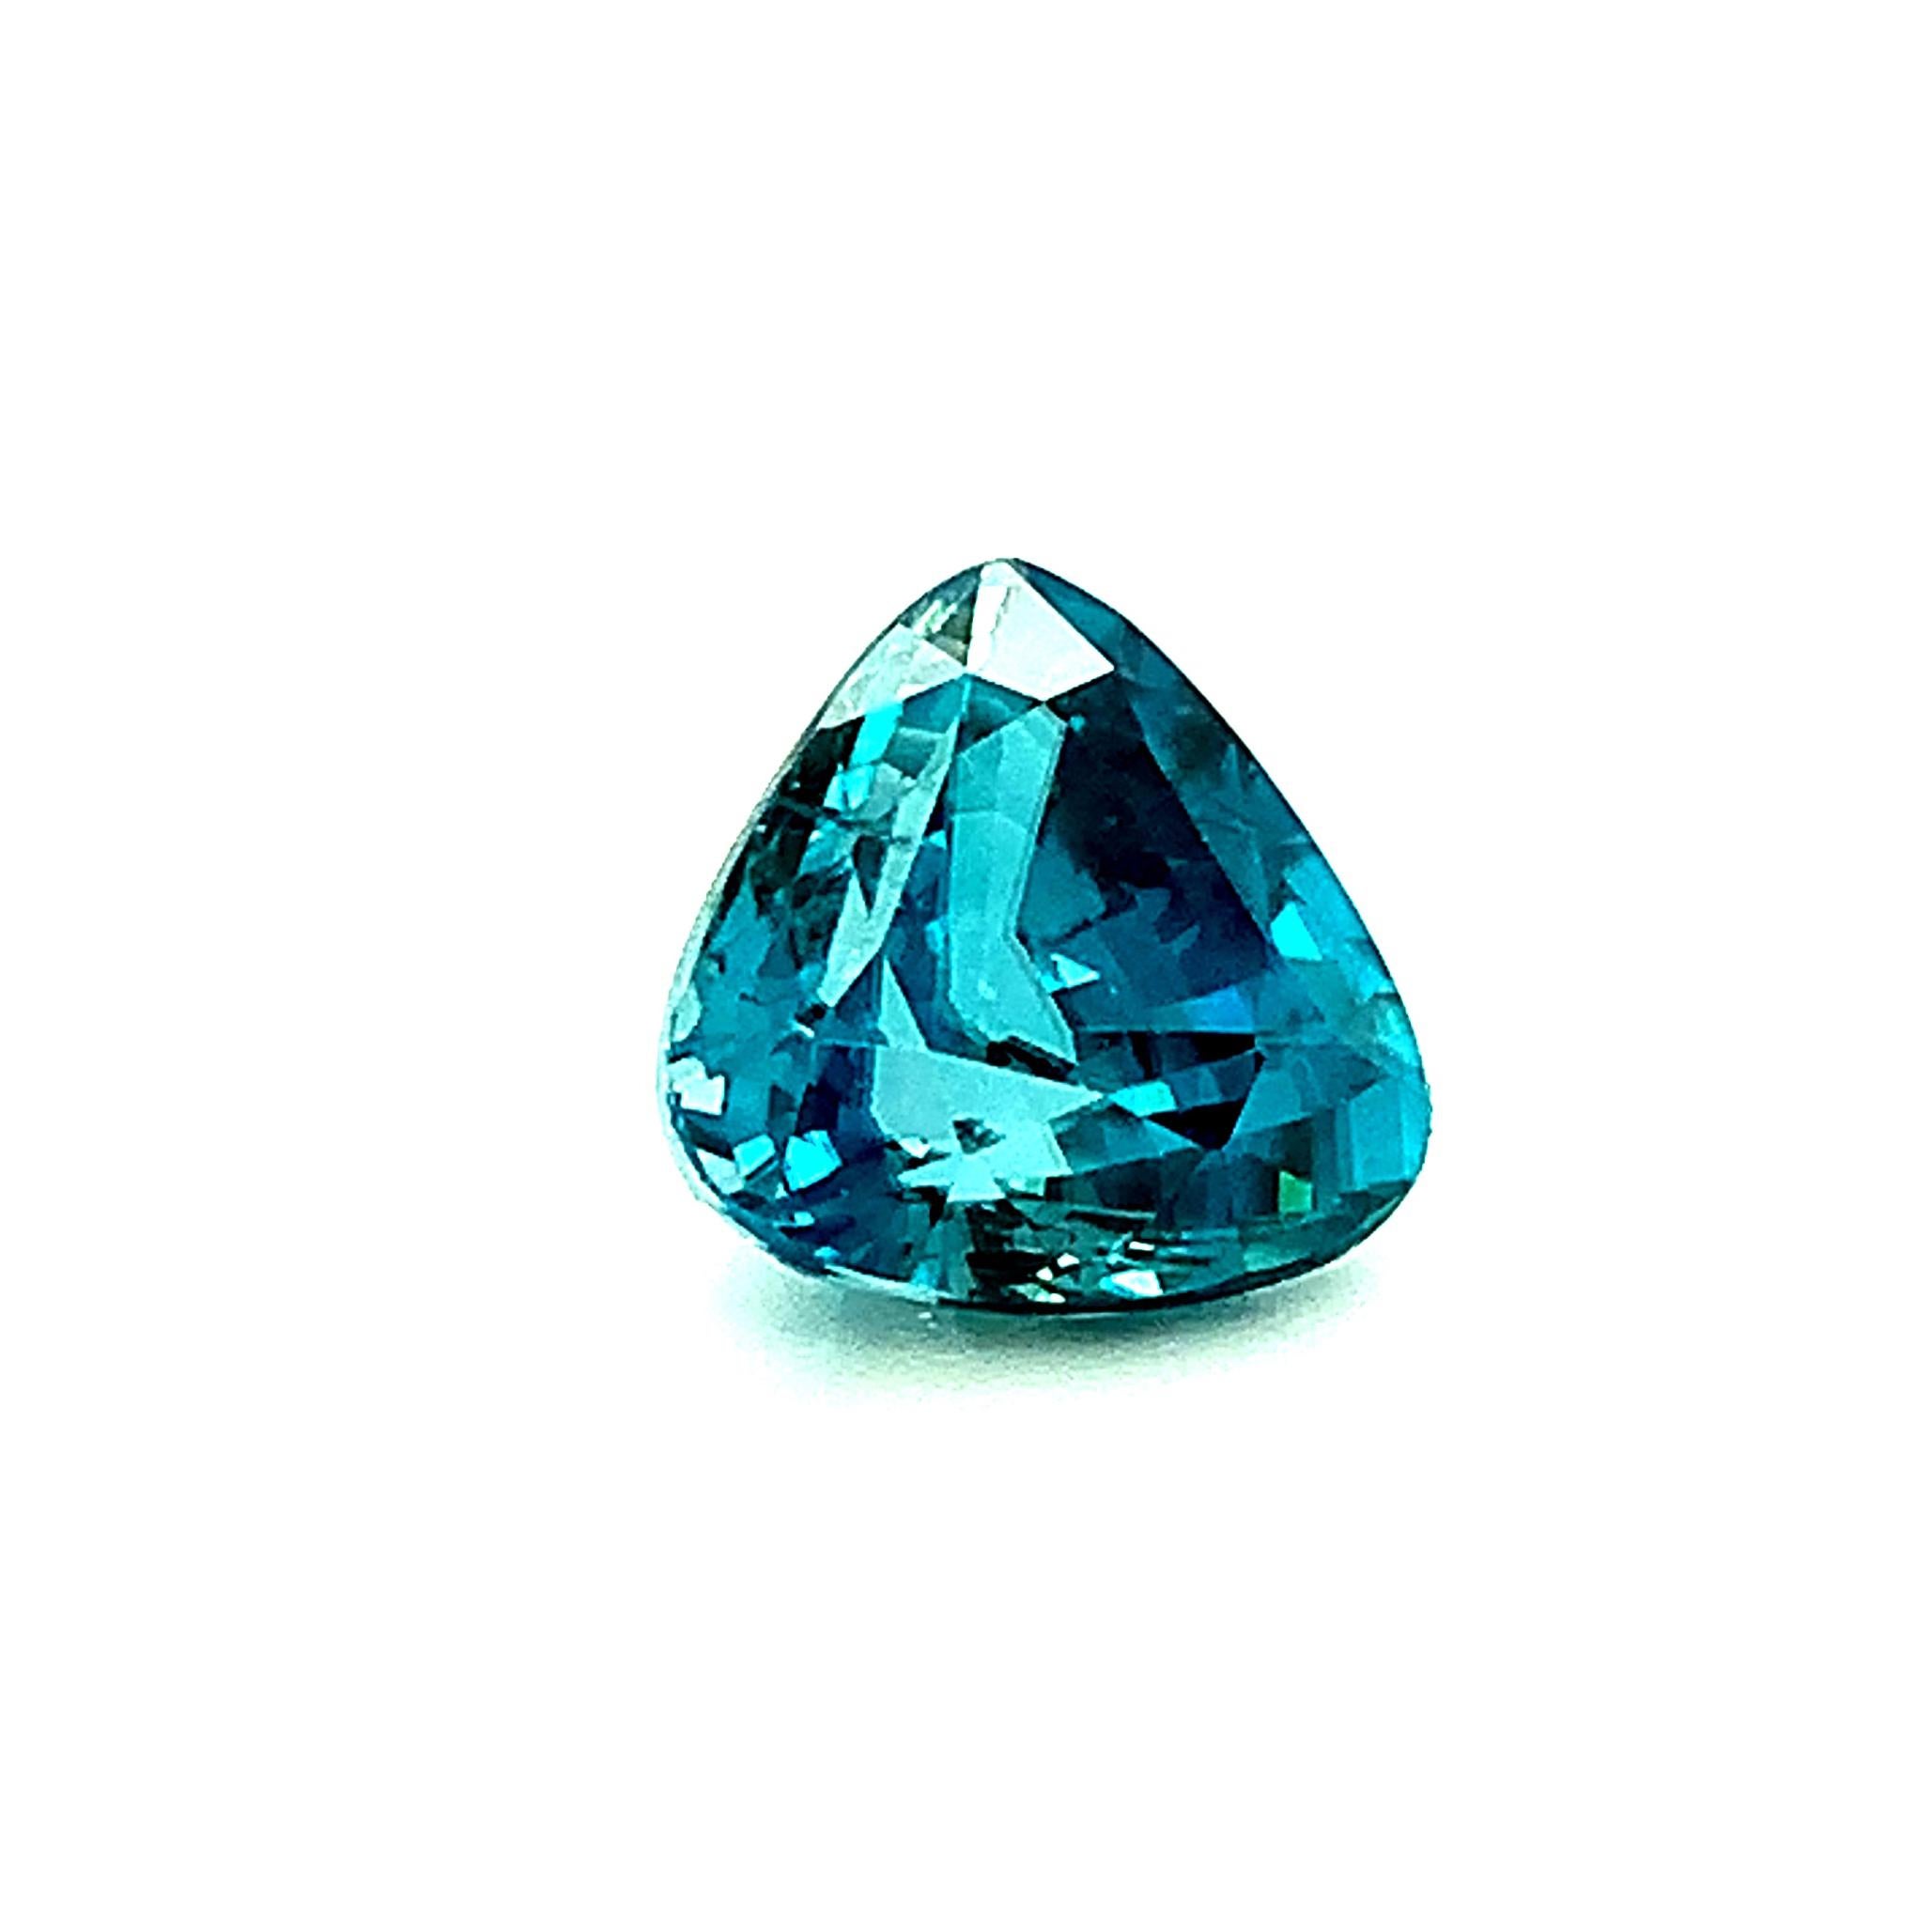 This trillion cut blue zircon would look beautiful set in a custom designed pendant or necklace enhancer. With a vivid, 